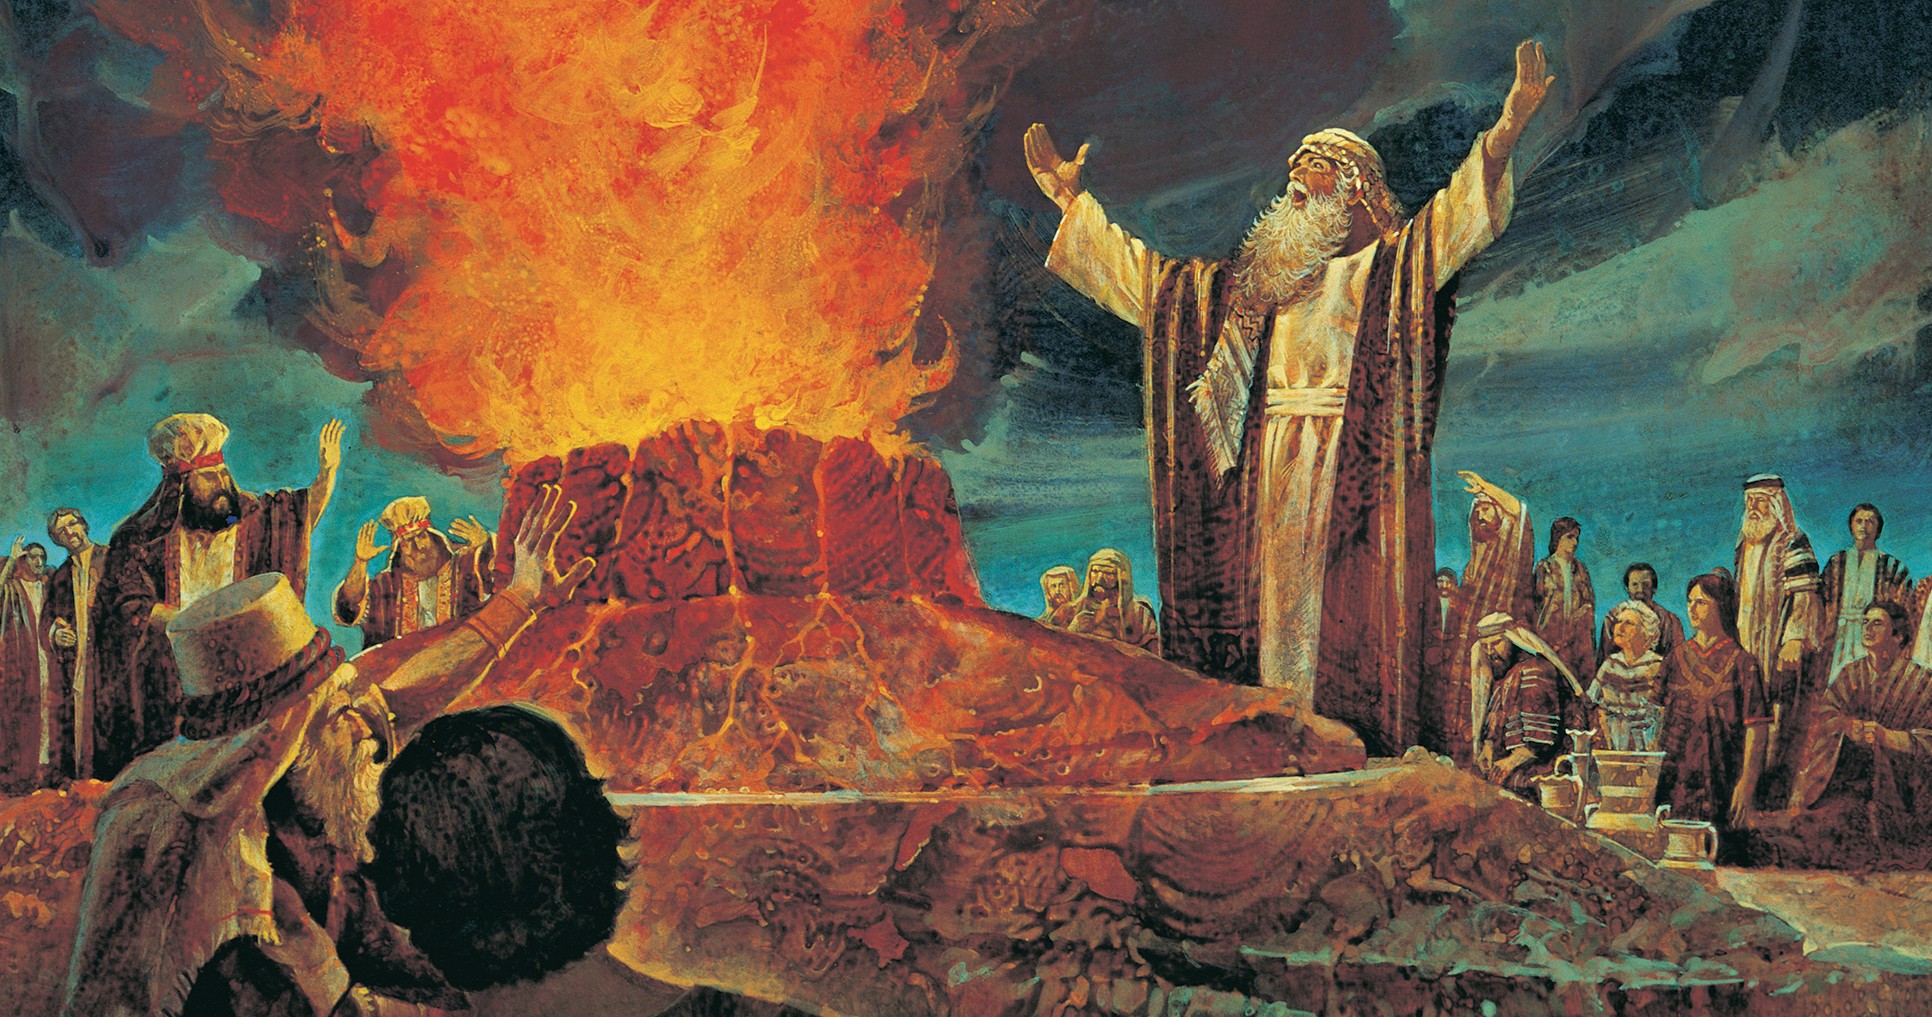 The Old Testament prophet Elijah standing next to an altar. Elijah has his arms extended as he commands fire from heaven to consume the altar.